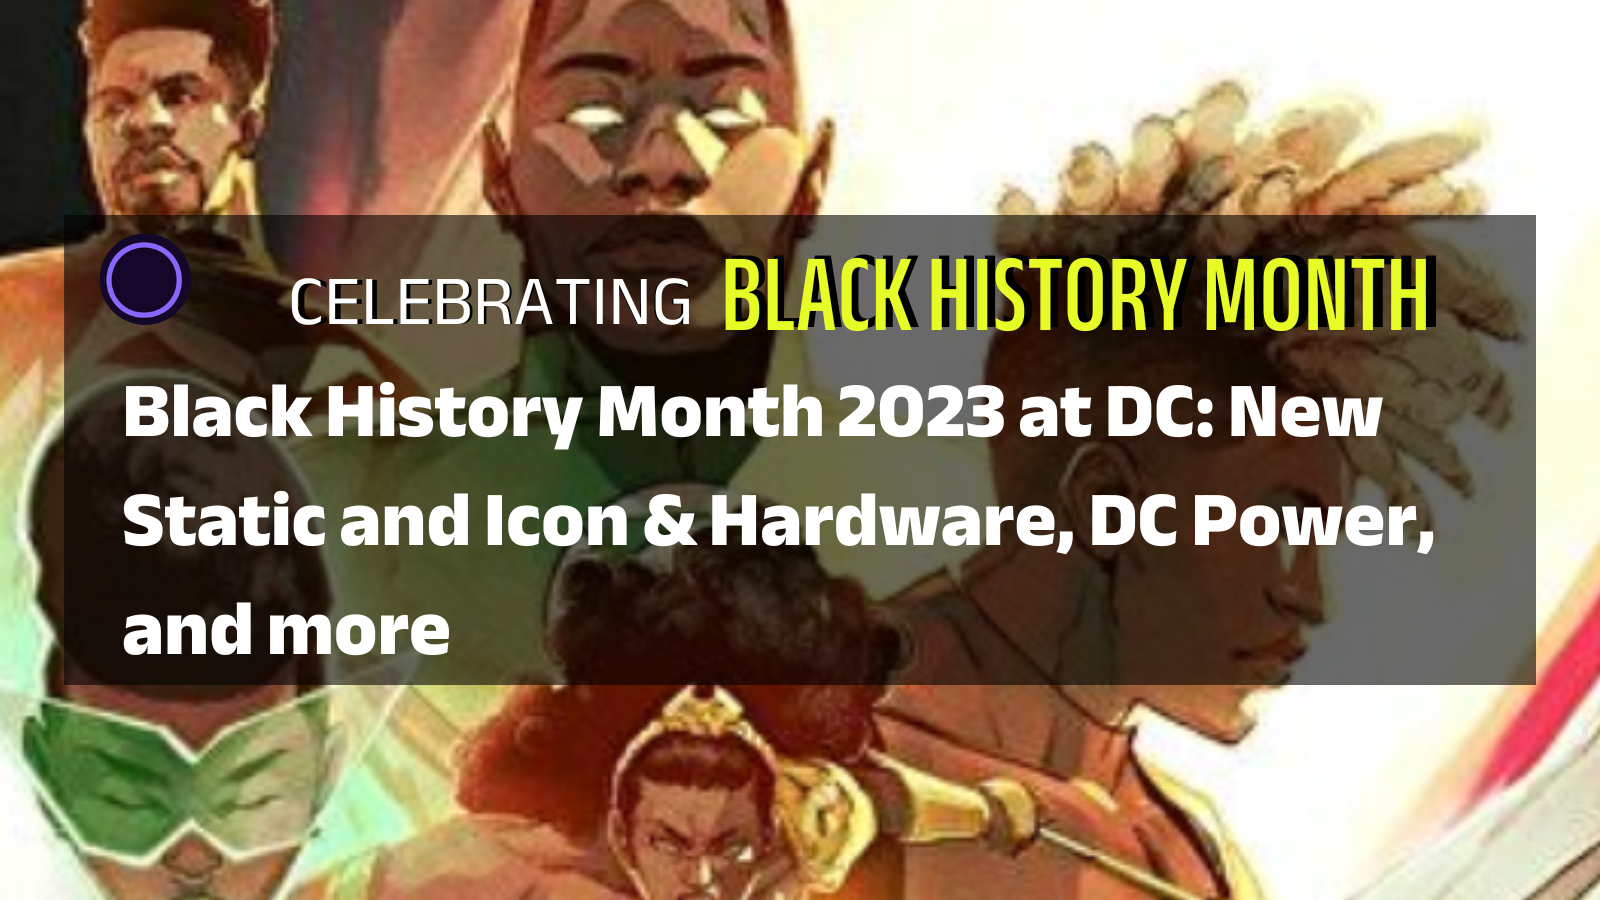 An illustration featuring black characters from DC Comics with an overlay that reads Celebrating Black History Month: Black History Month 2023 at DC: New Static and Icon & Hardware, DC Power, and more